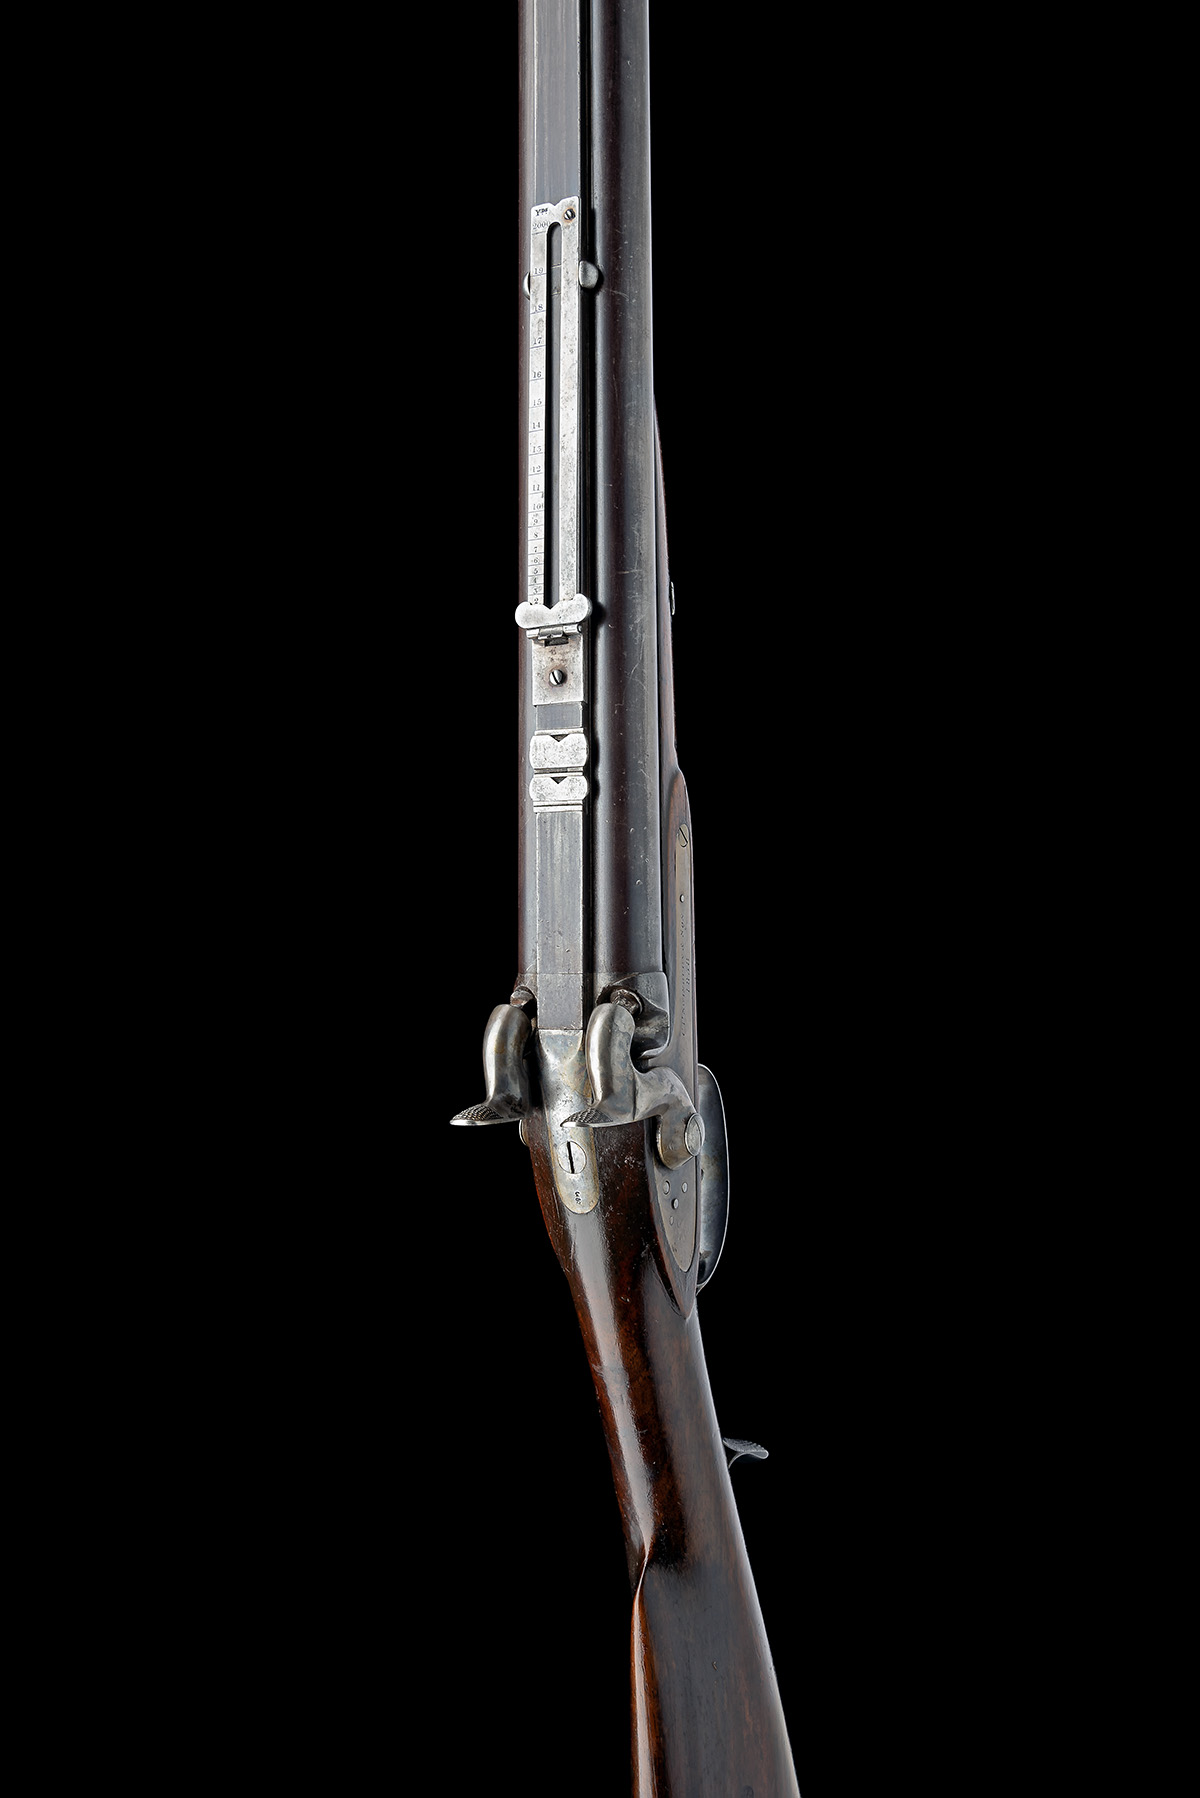 A RARE, POSSIBLY UNIQUE, CASED .524 PERCUSSION JACOB'S DOUBLE RIFLE BY C.P. SWINBURN & SON, no - Image 4 of 4